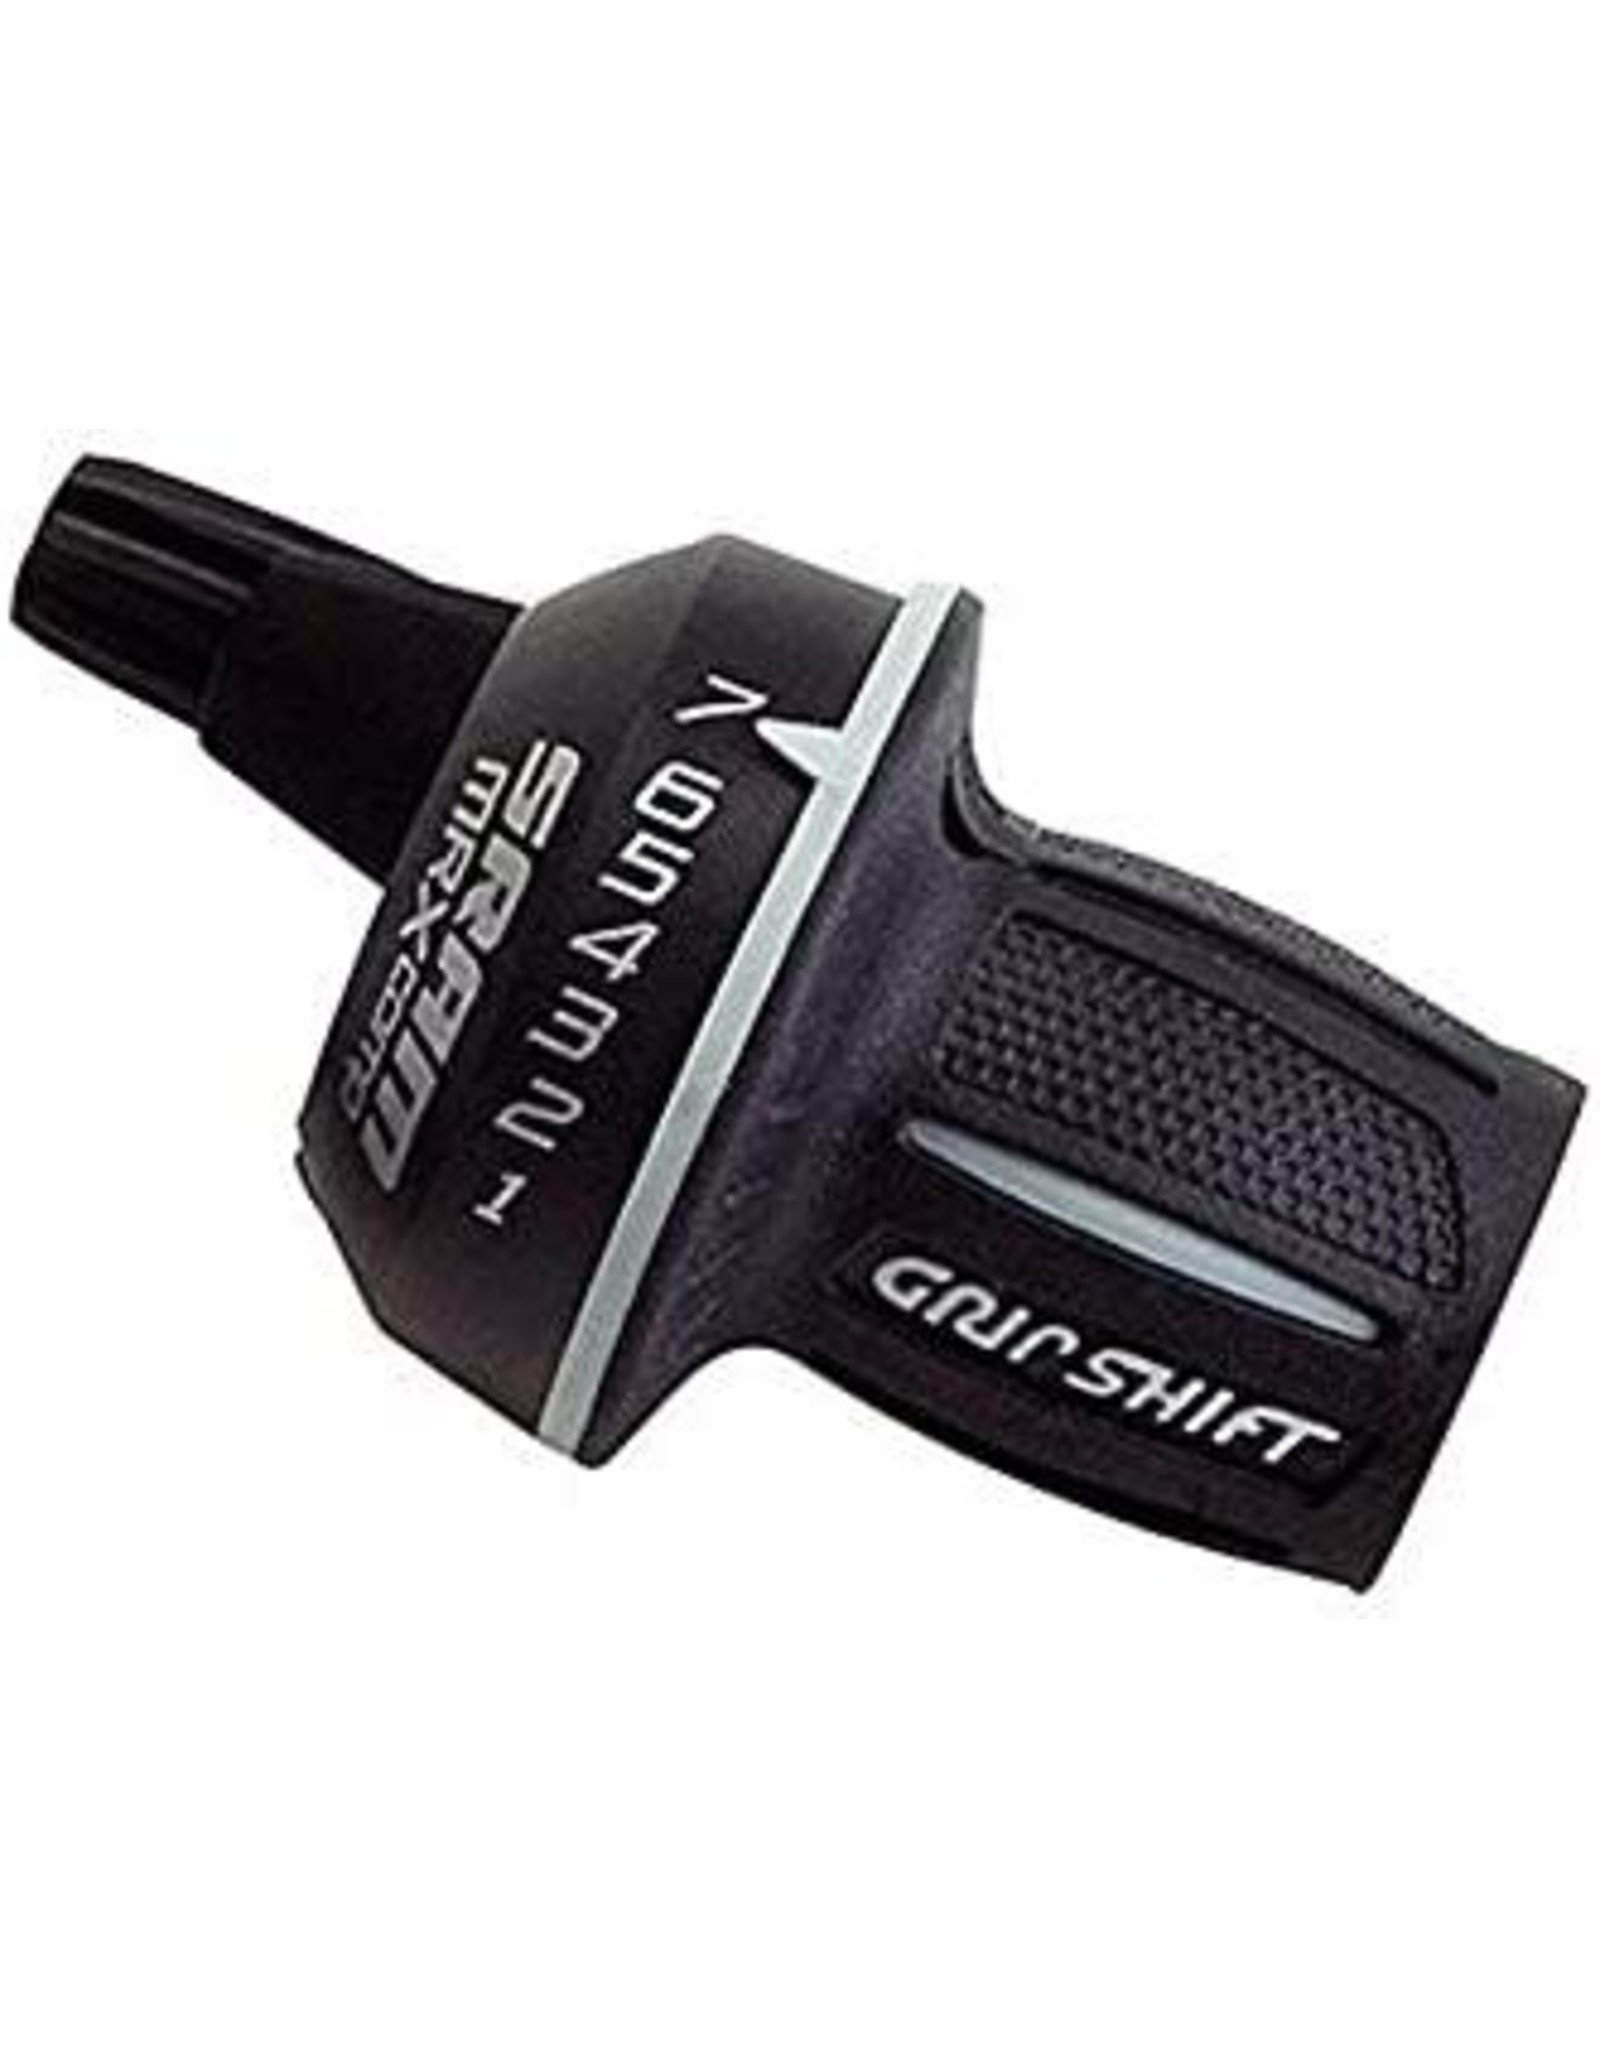 Shifter, Right, SRAM, 5.0, Twist shifter, 8 speed, 1:1 actuation